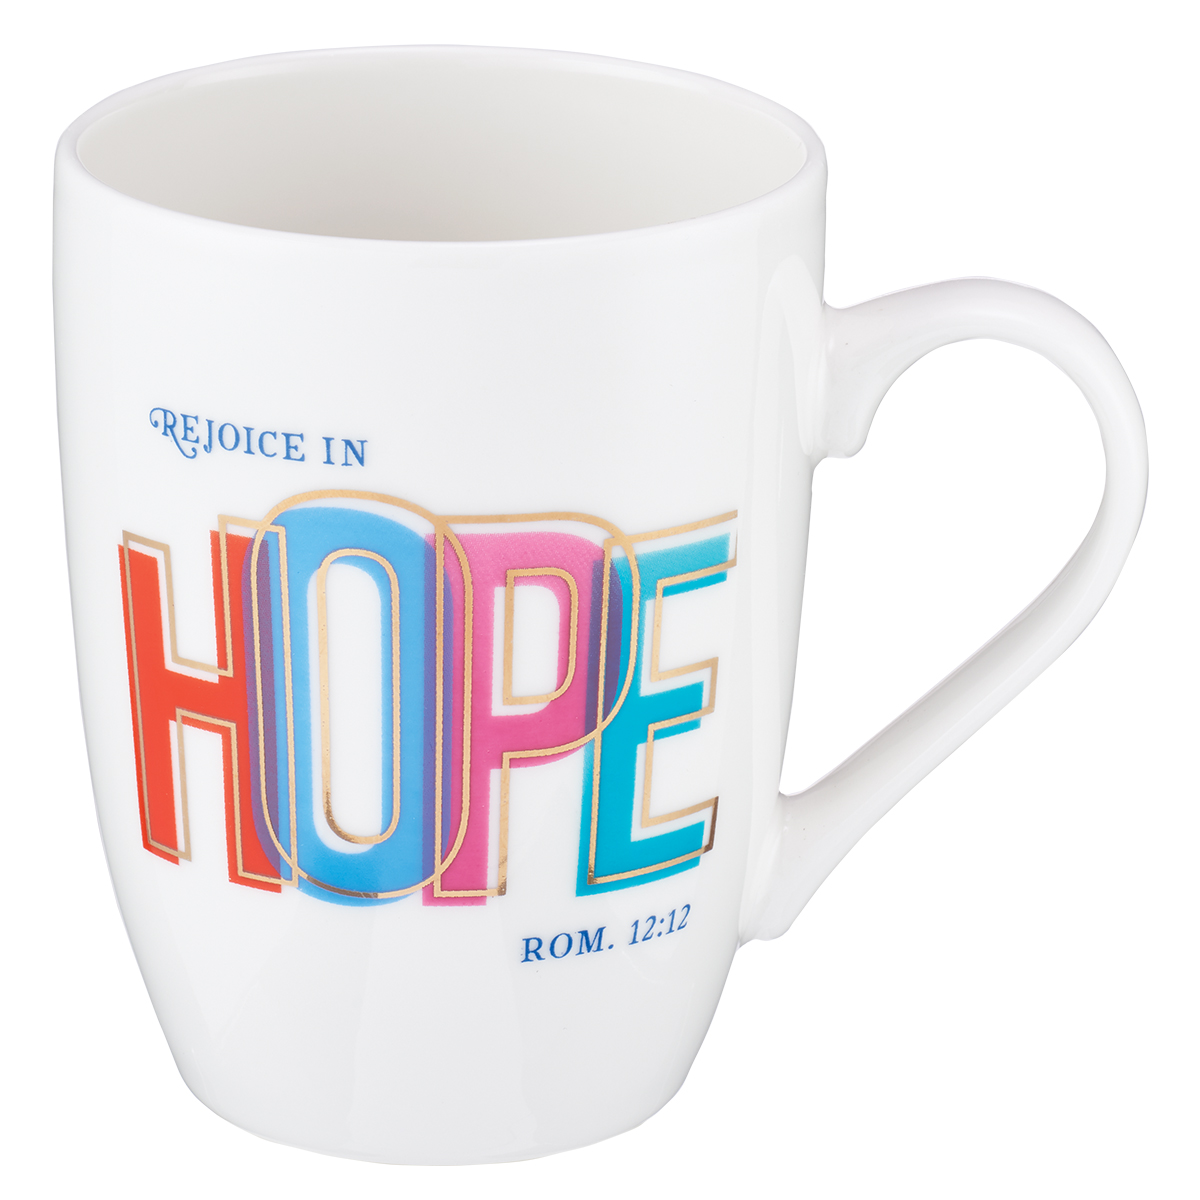 Rejoice In Hope Coffee Mug – Romans 12:12 | Free Delivery when you